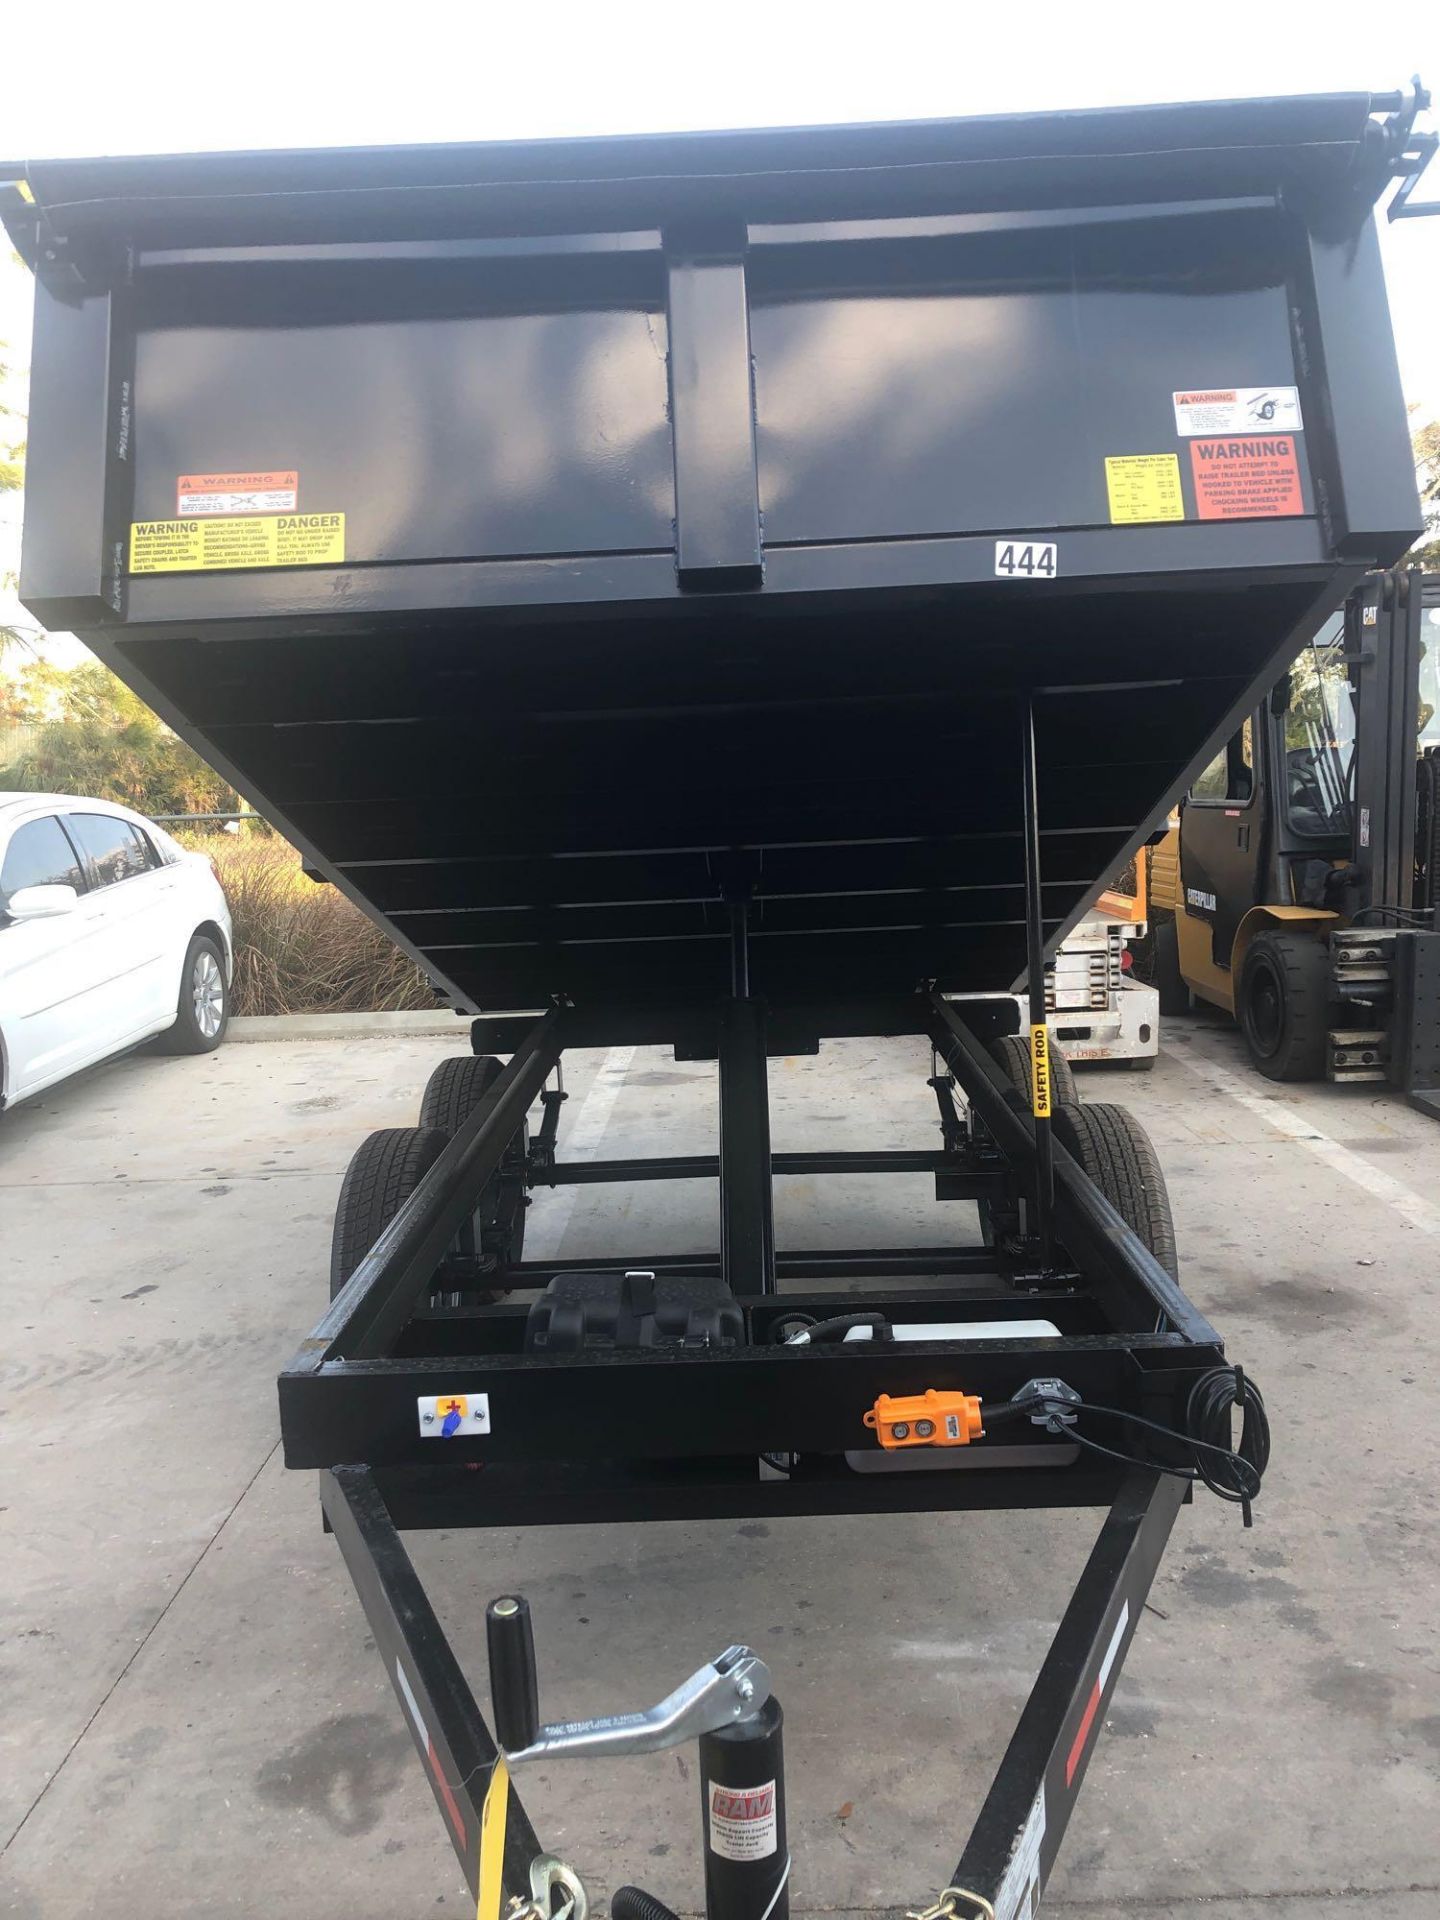 2019 SS DUMP TRIALER W/ ELECTRIC REMOTE, DUAL AXLE, 7,000 LB GVWR - Image 9 of 11